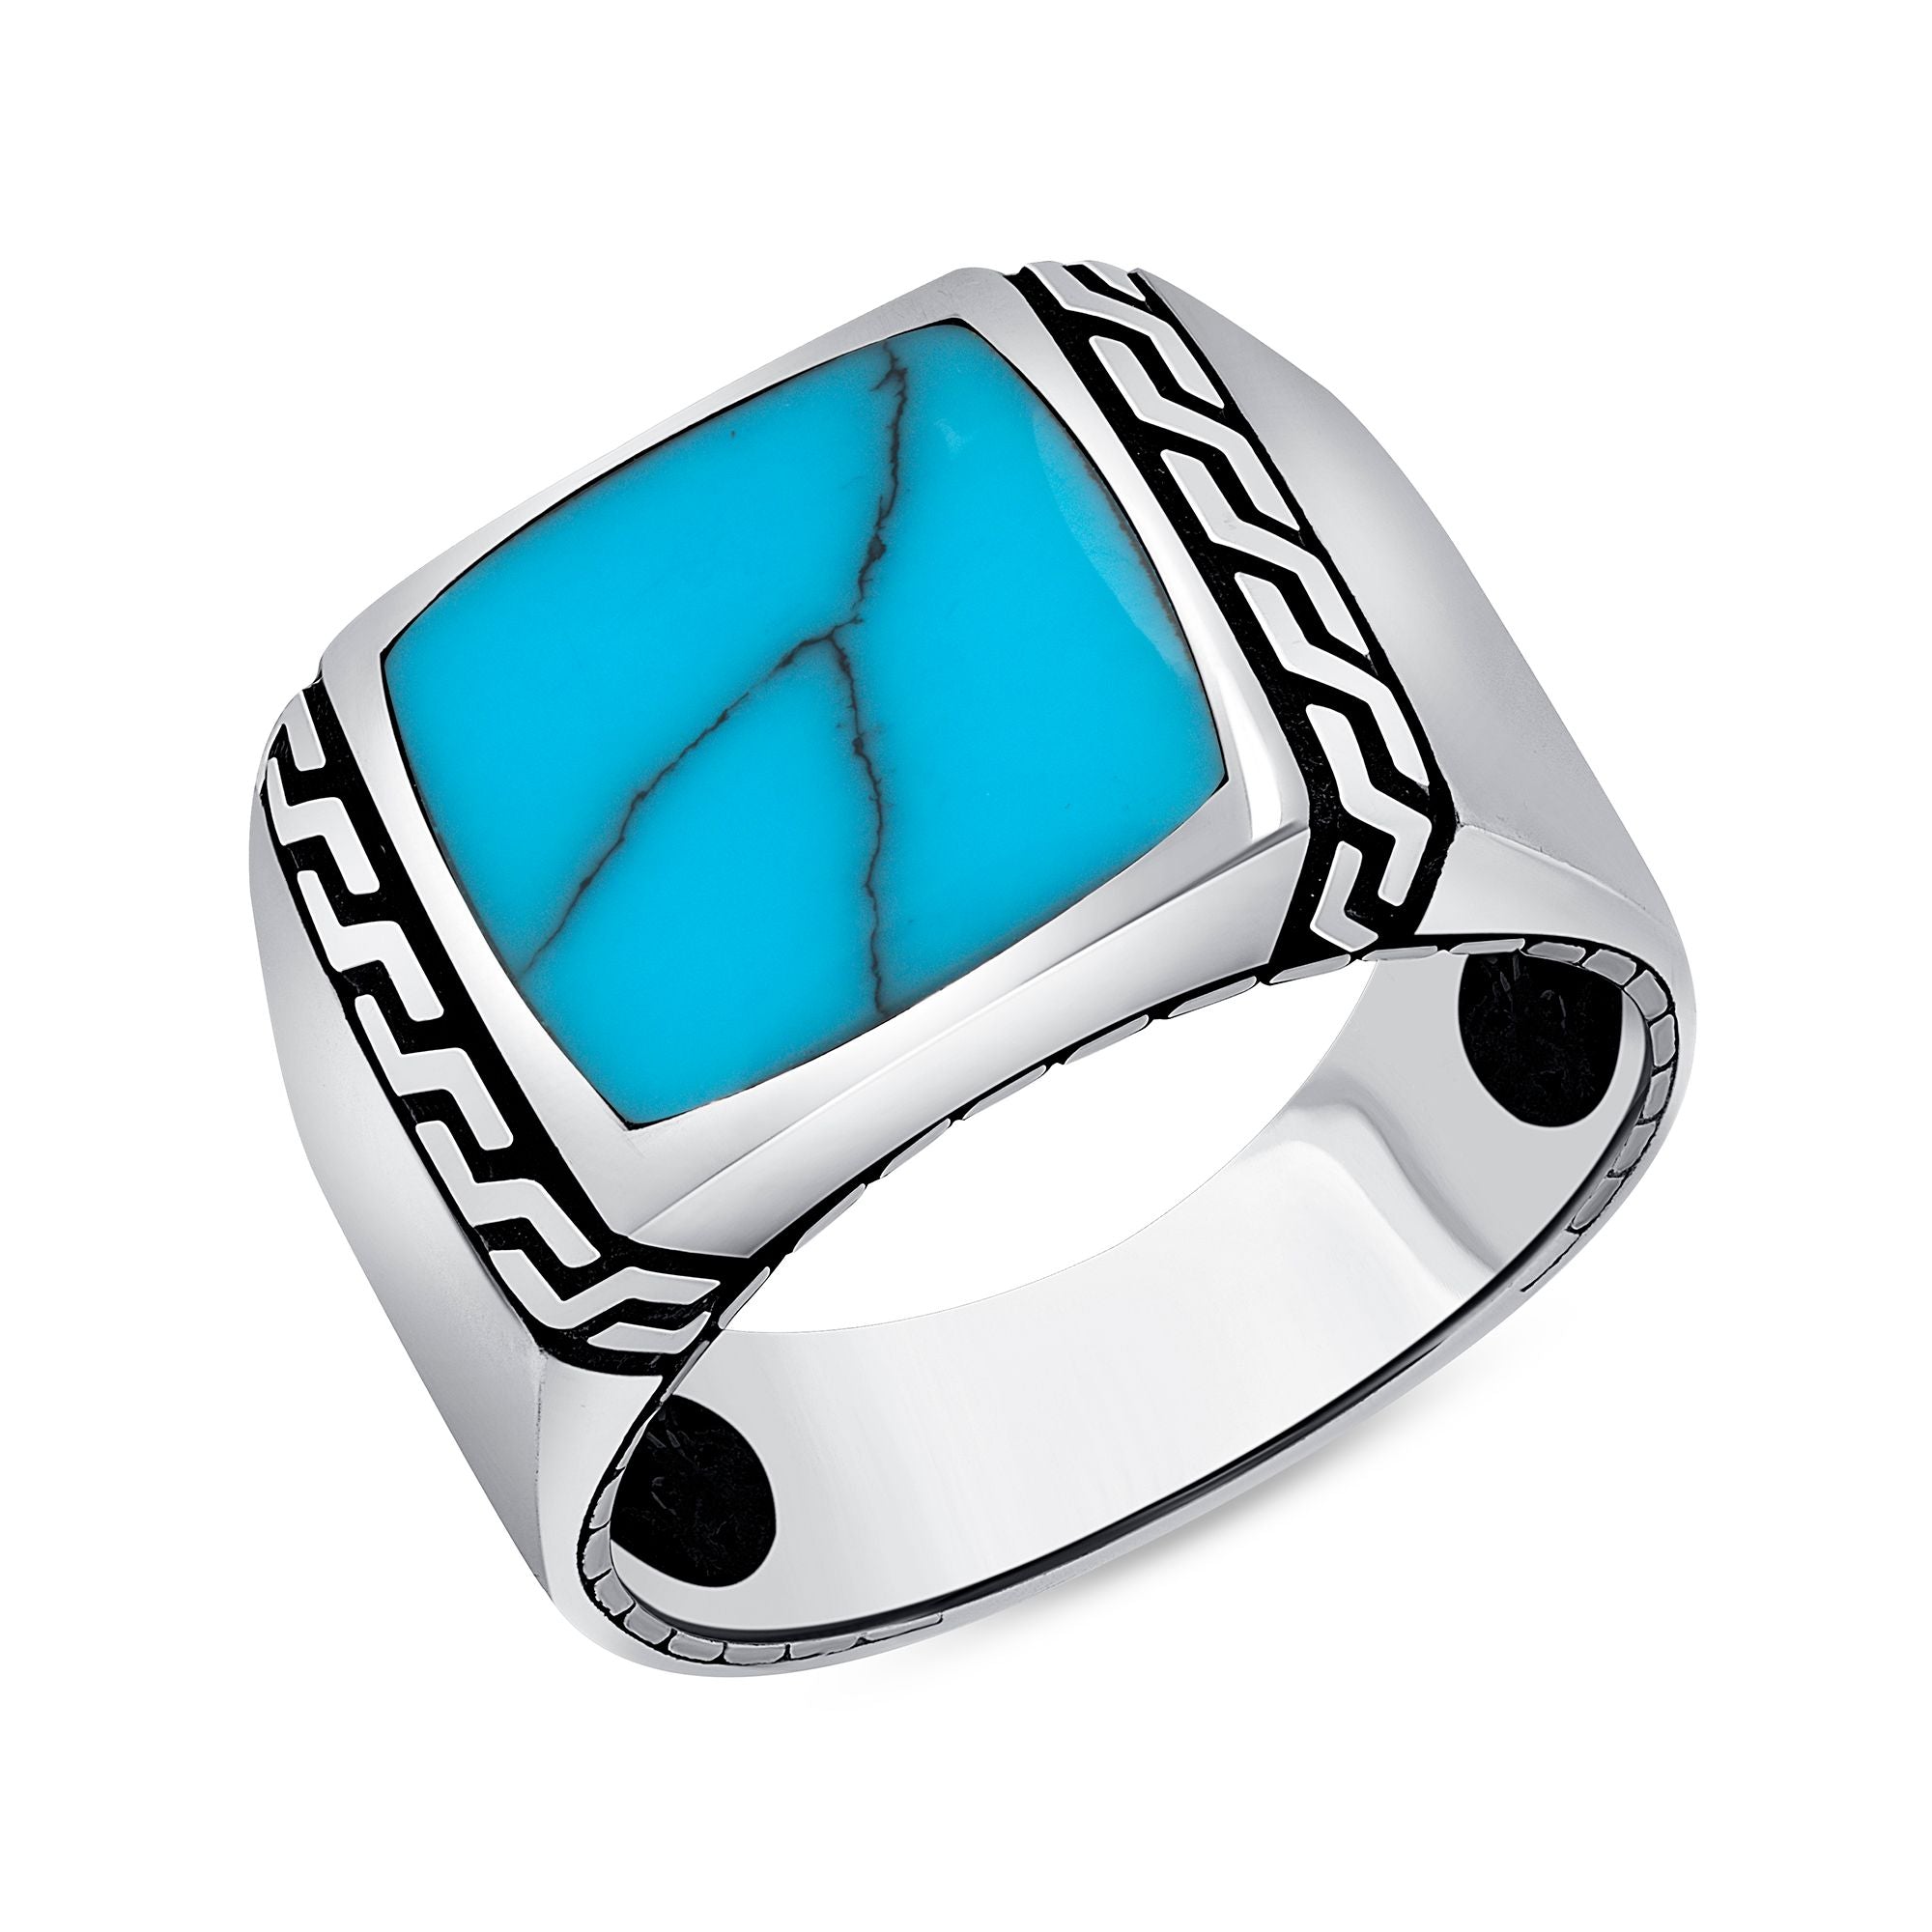 Oxidized 925 Sterling Silver Square Turquoise Tribal Design Men&